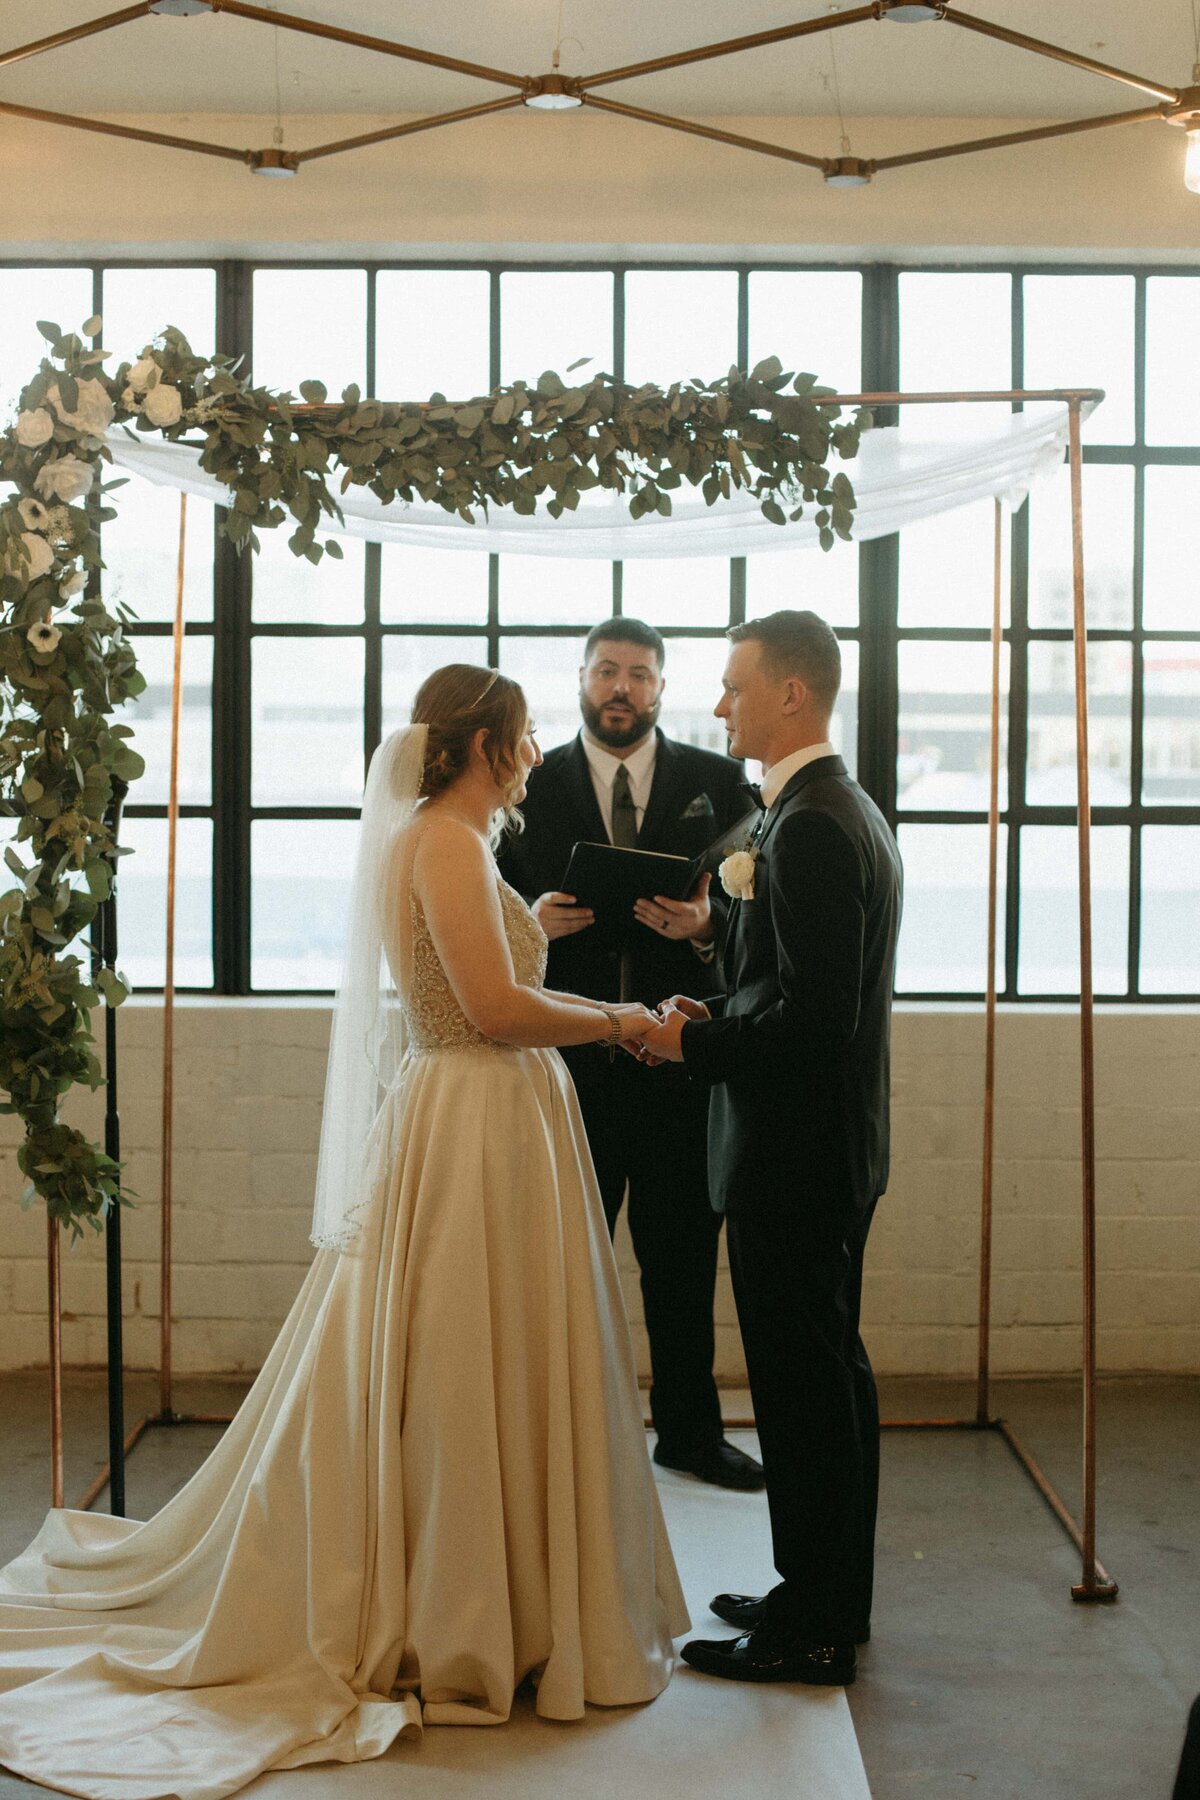 Bride and groom exchanging vows in front of an officiant under a floral arch inside a bright room with industrial windows at an Iowa wedding.